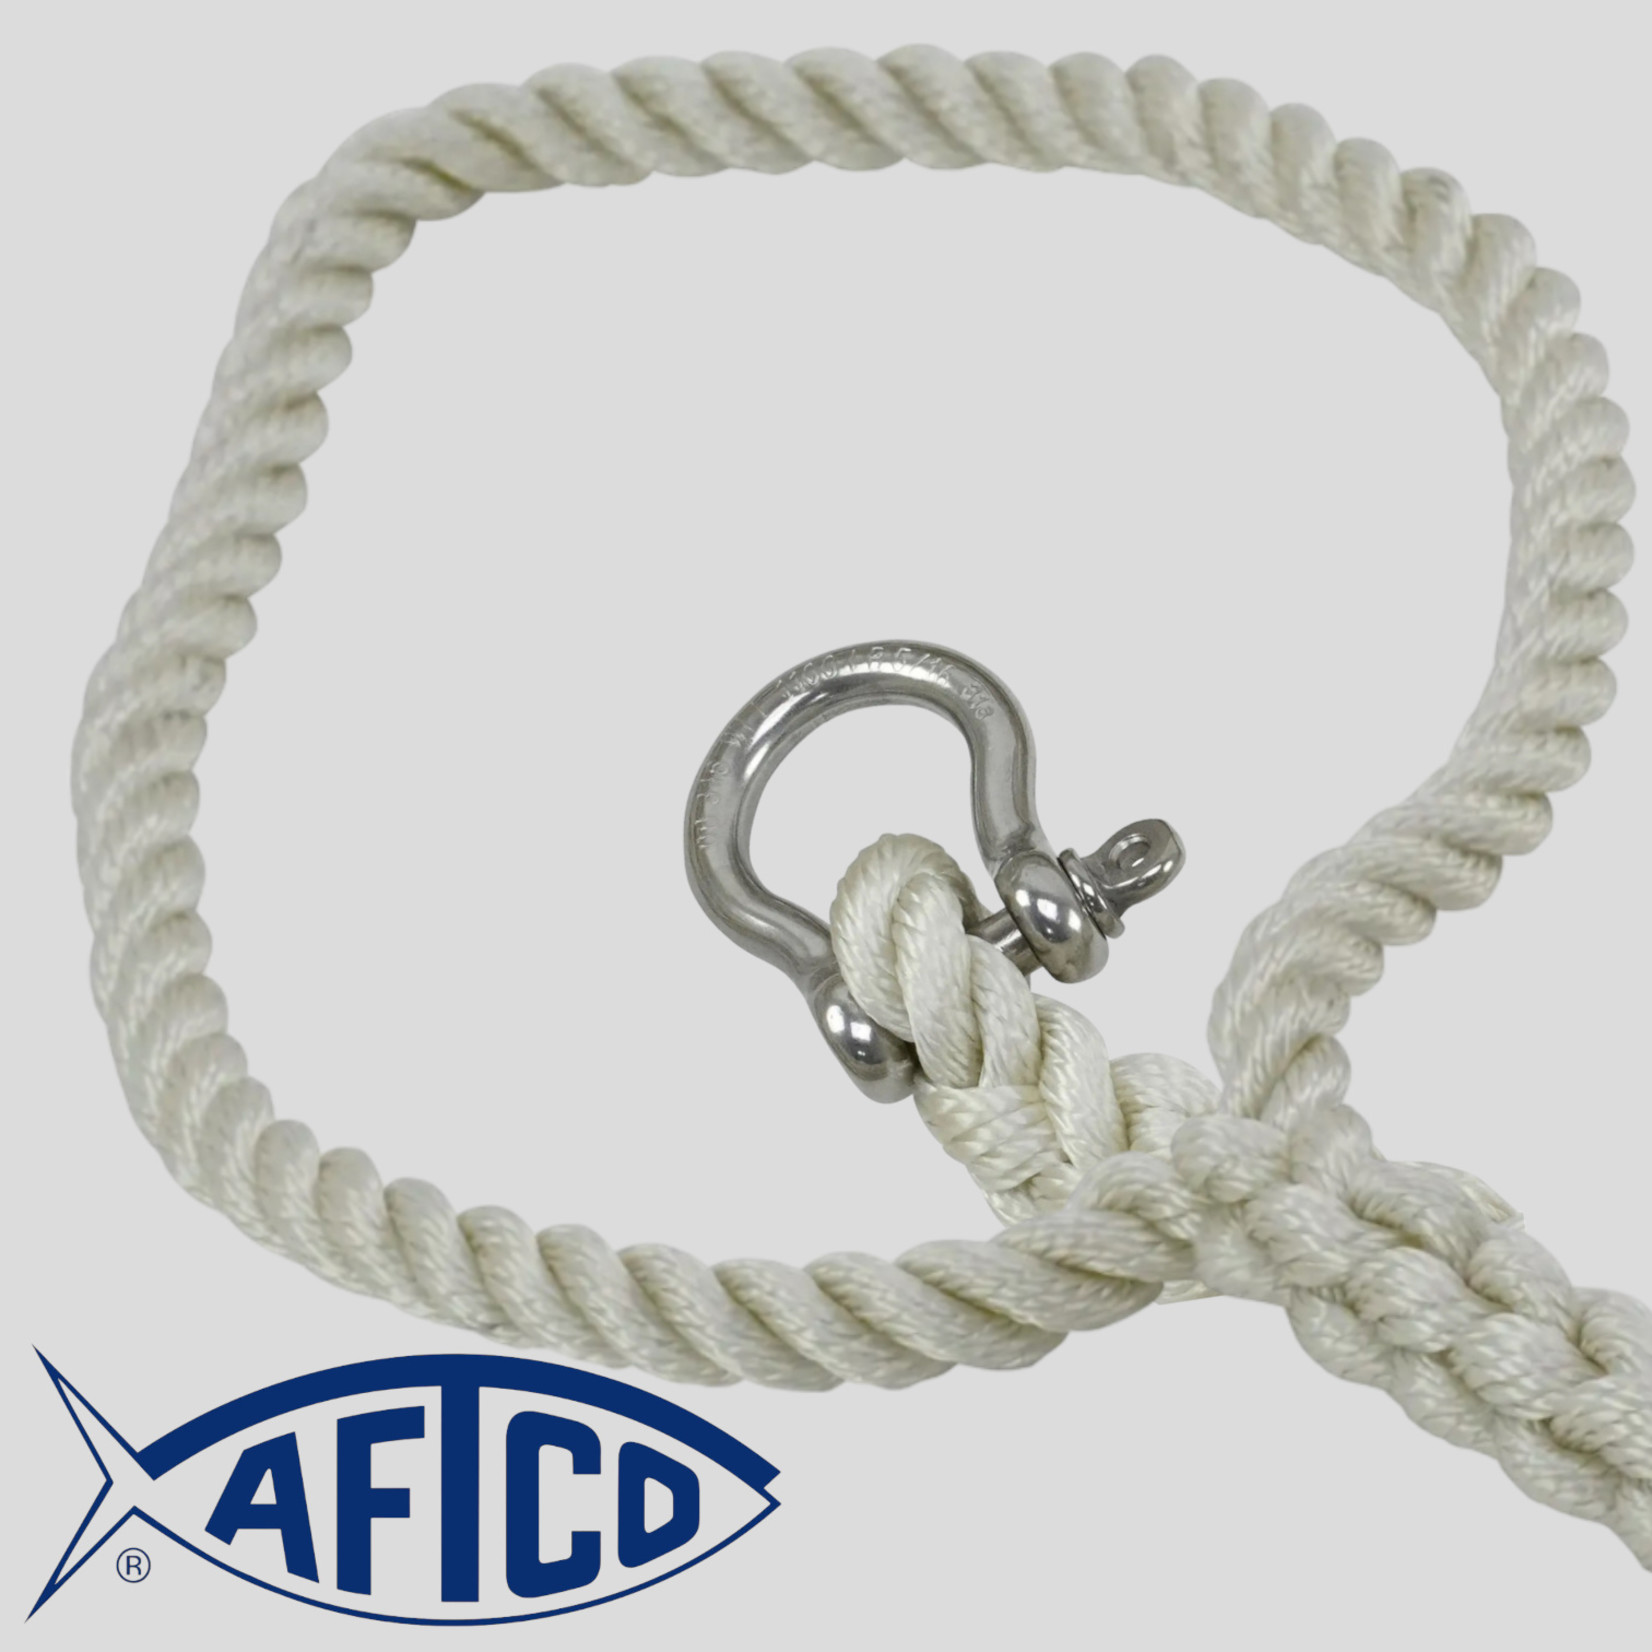 Aftco Aftco Fly Gaff Kit